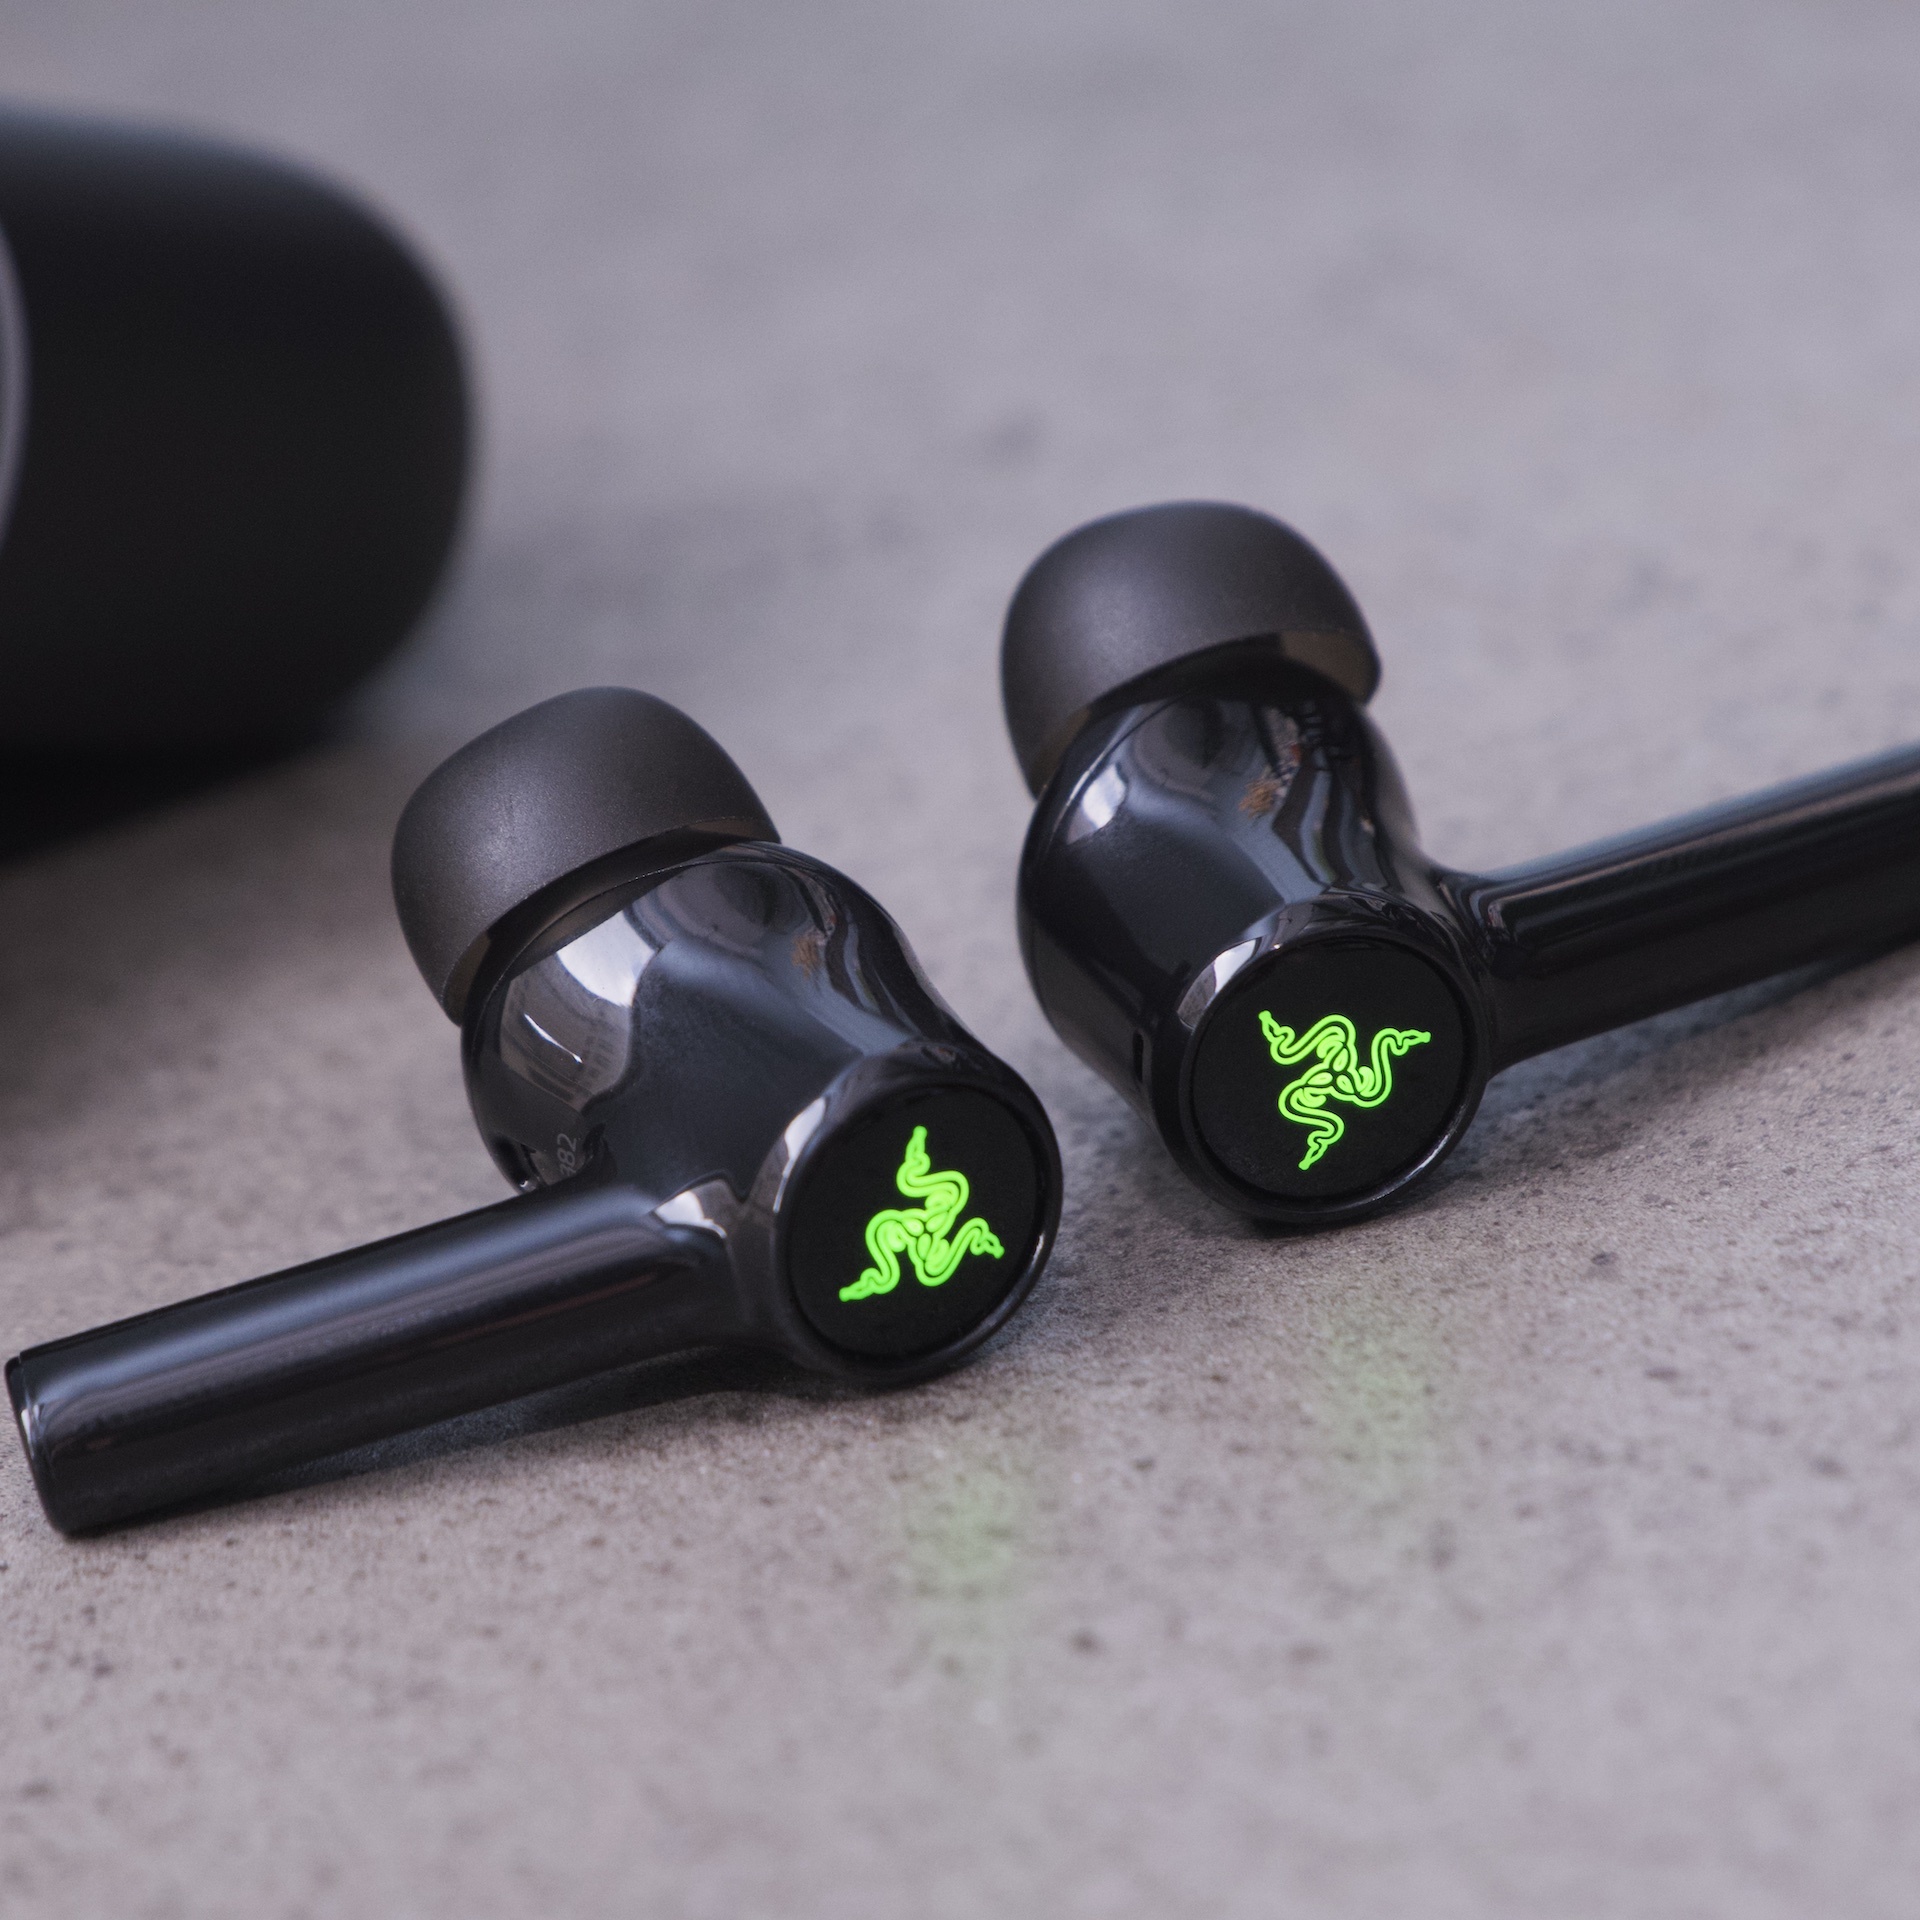 Razer Hammerhead True Wireless (2021) review: ANC with a colorful